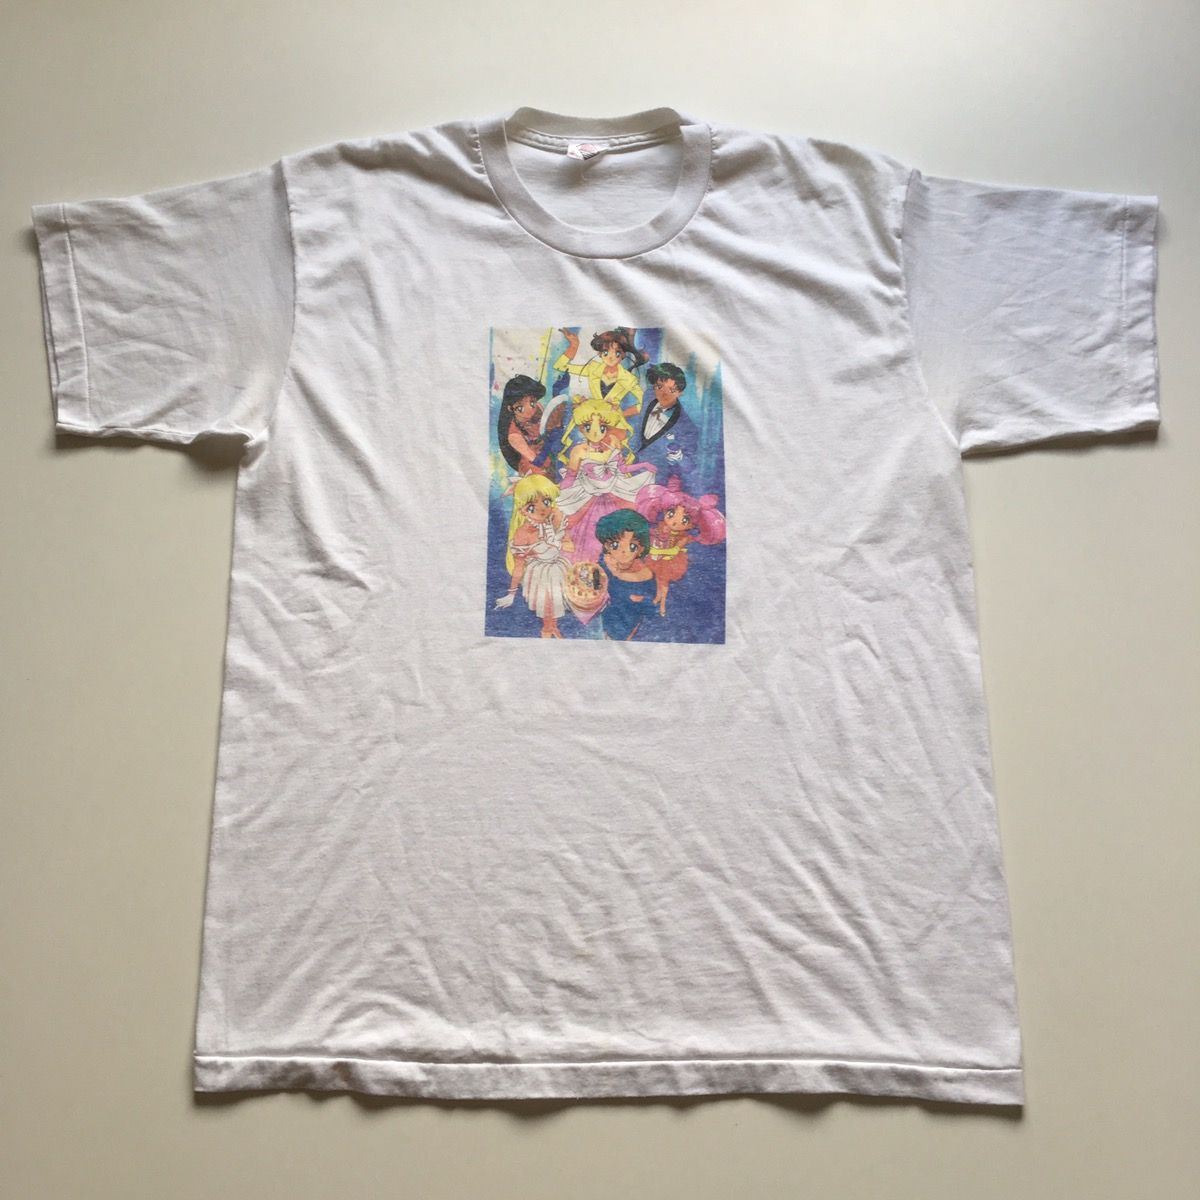 Pre-owned Vintage 90's Sailor Moon Anime Cartoon Graphic T-shirt In White